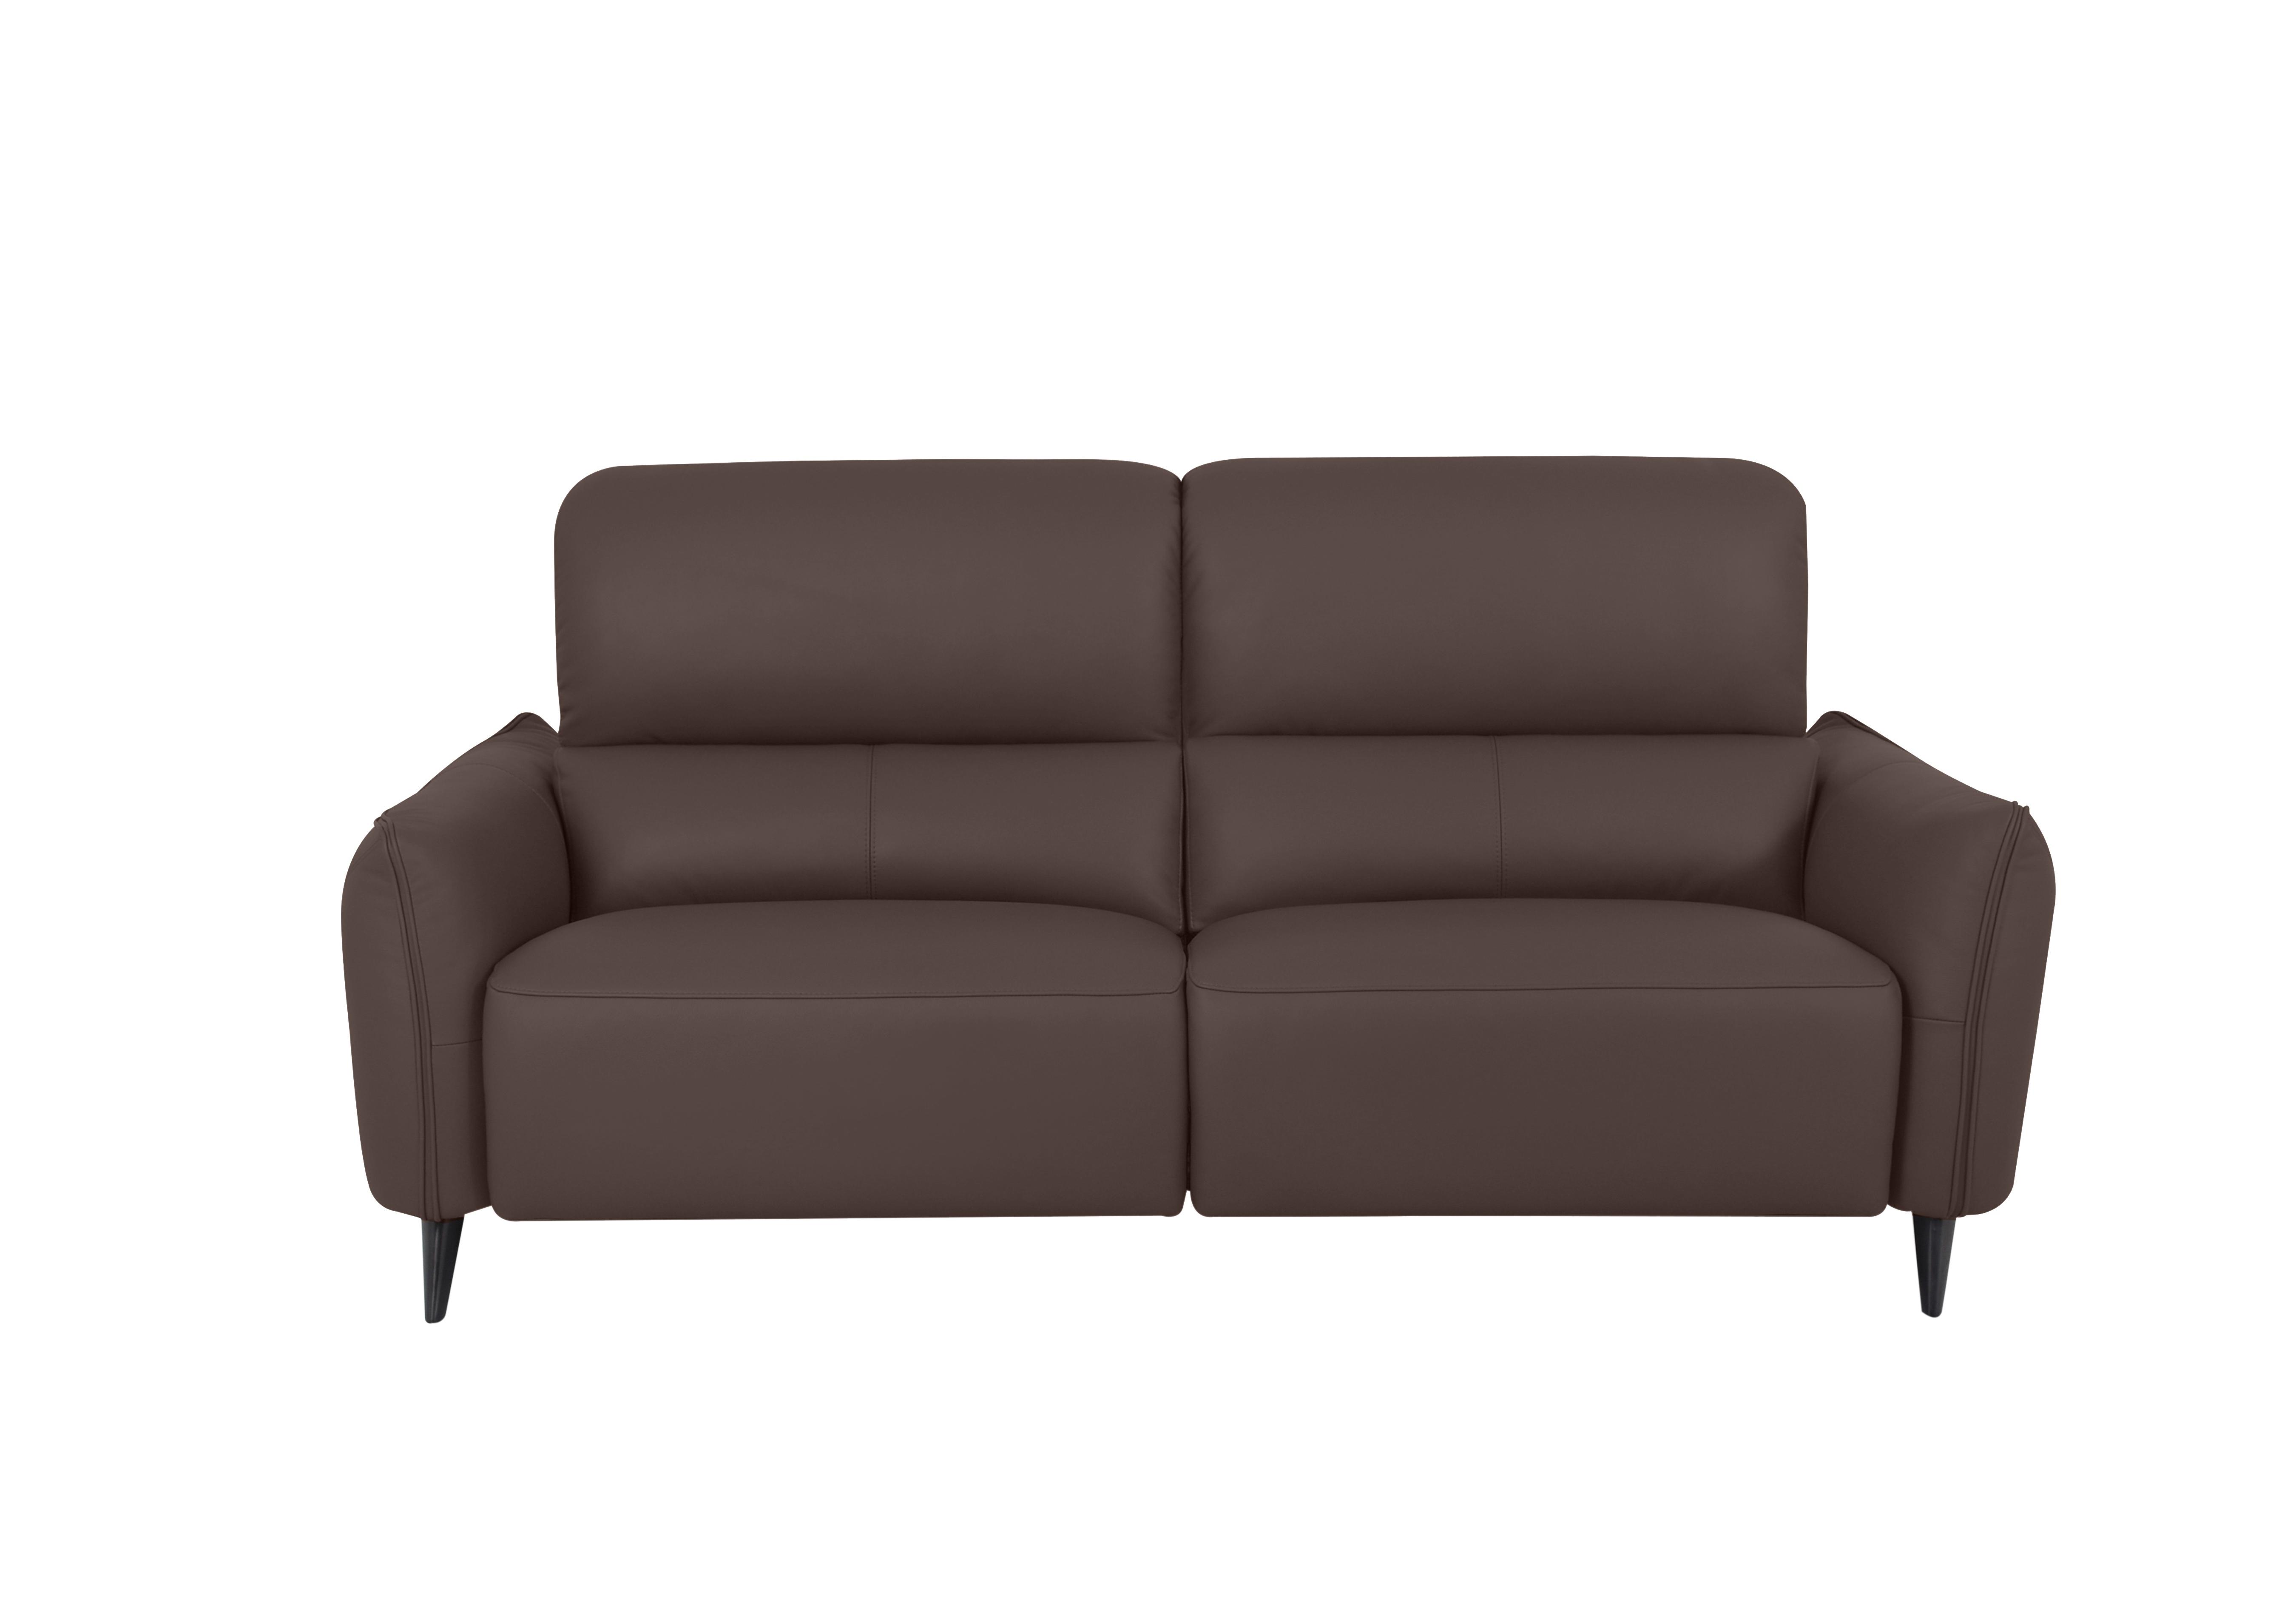 Maddox 3 Seater Leather Sofa in Nn-512e Cacao Brown on Furniture Village